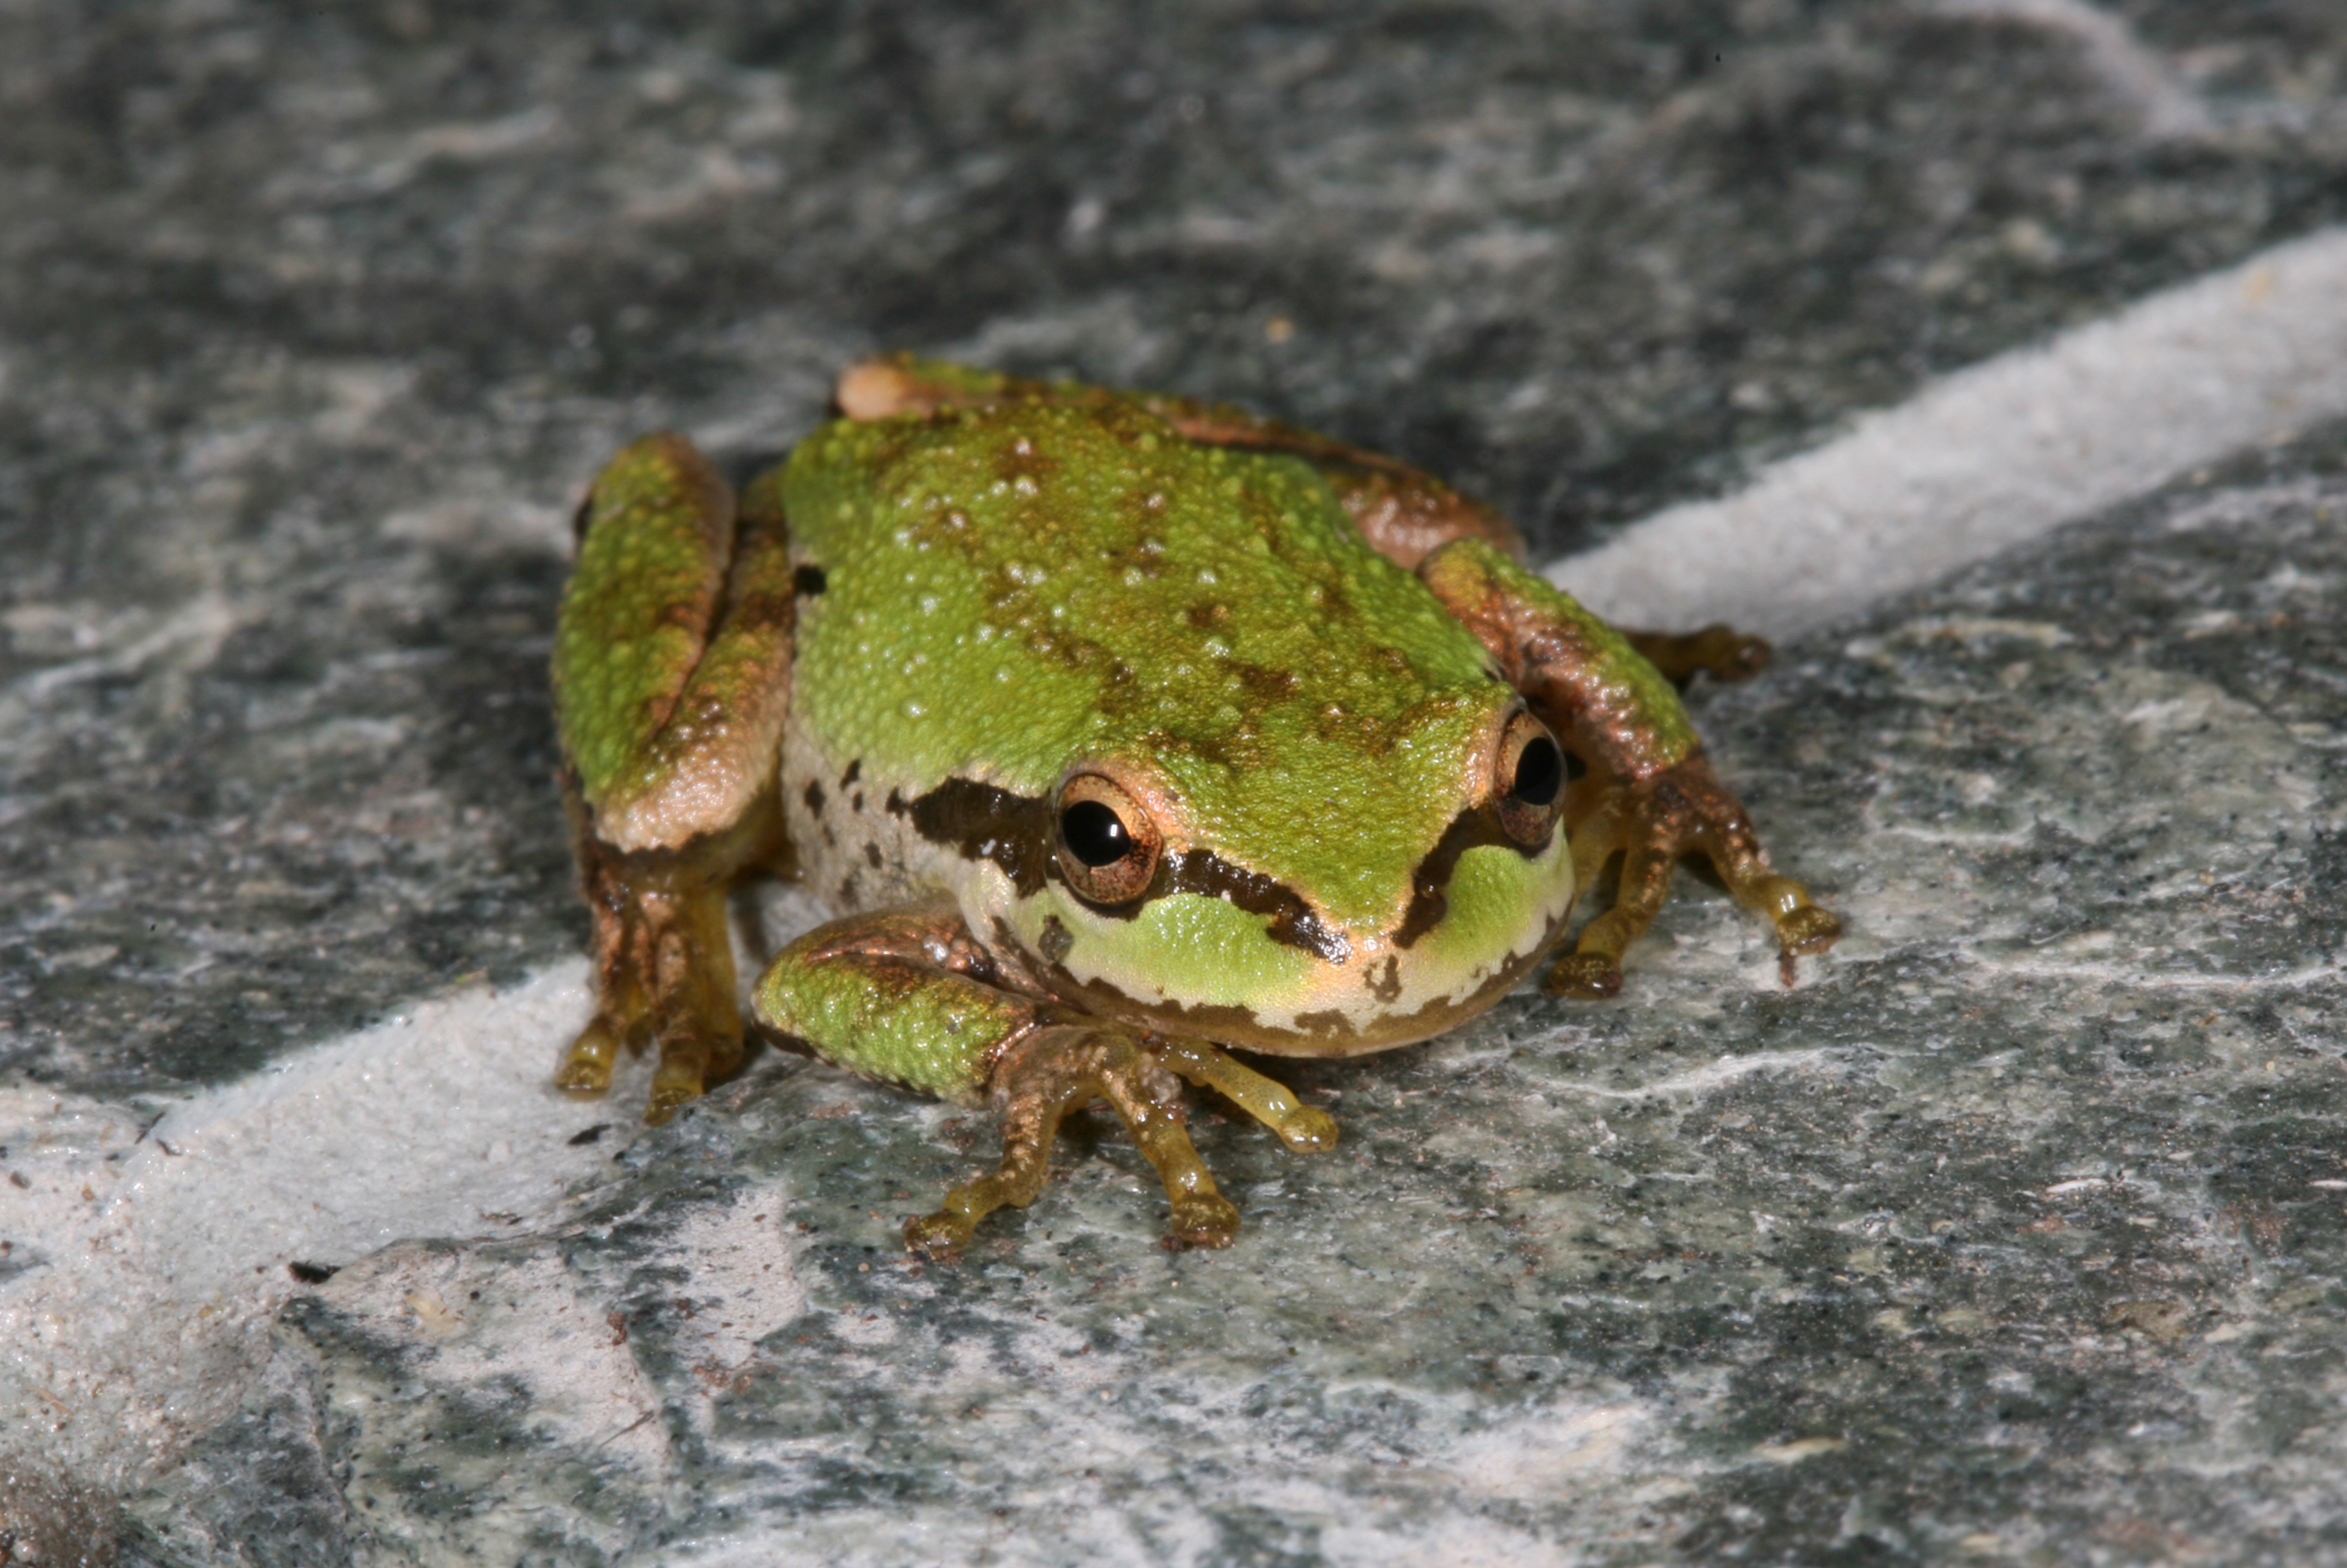 the Pacific tree frog